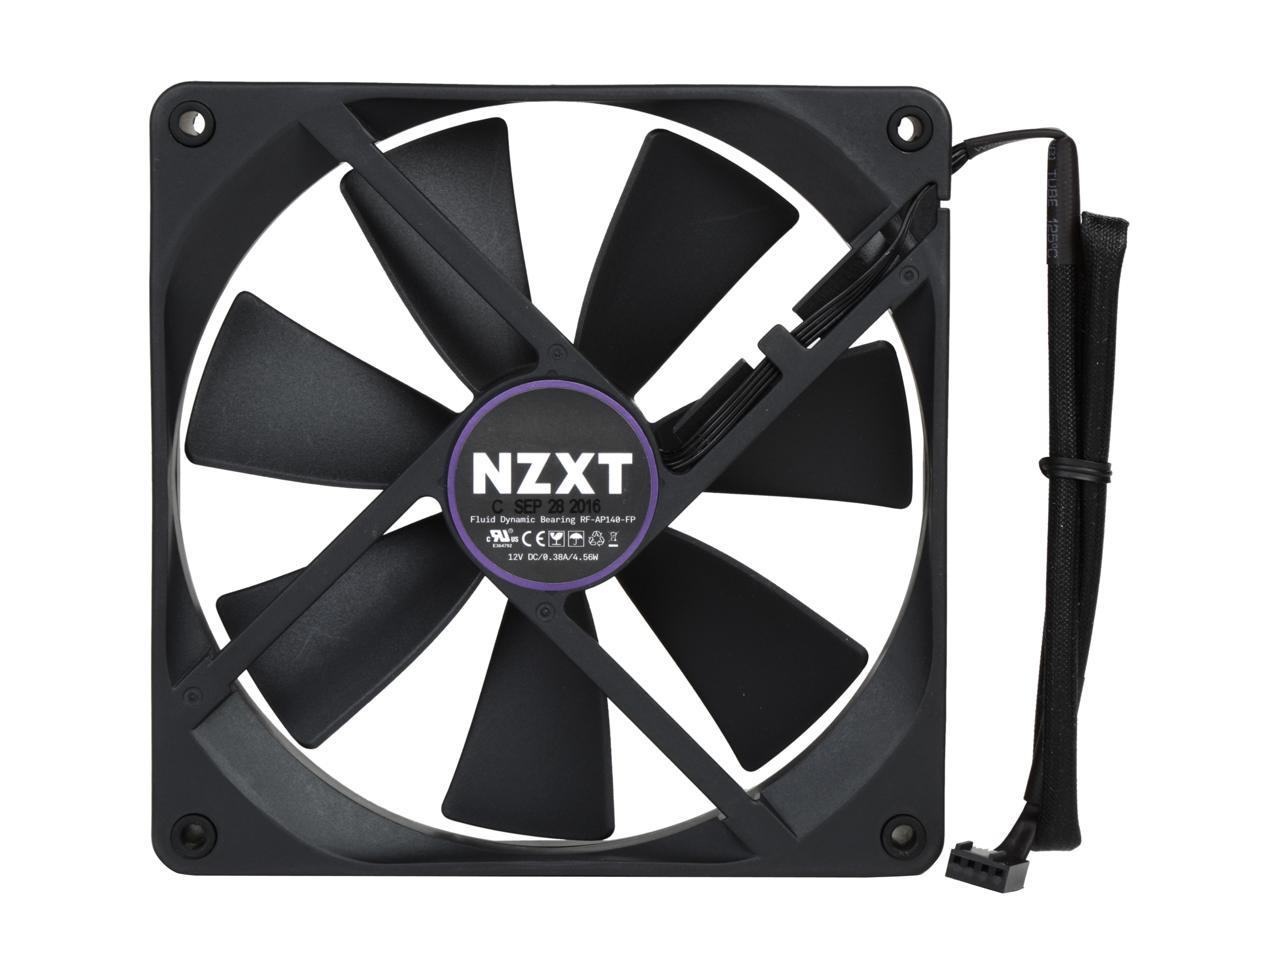 Nzxt Kraken X62 280mm All In One Rgb Cpu Liquid Cooler Cam Powered Infinity Mirror Design Performance Engineered Pump Reinforced Extended Tubing Aer P140mm Radiator Fan 2 Included Newegg Com